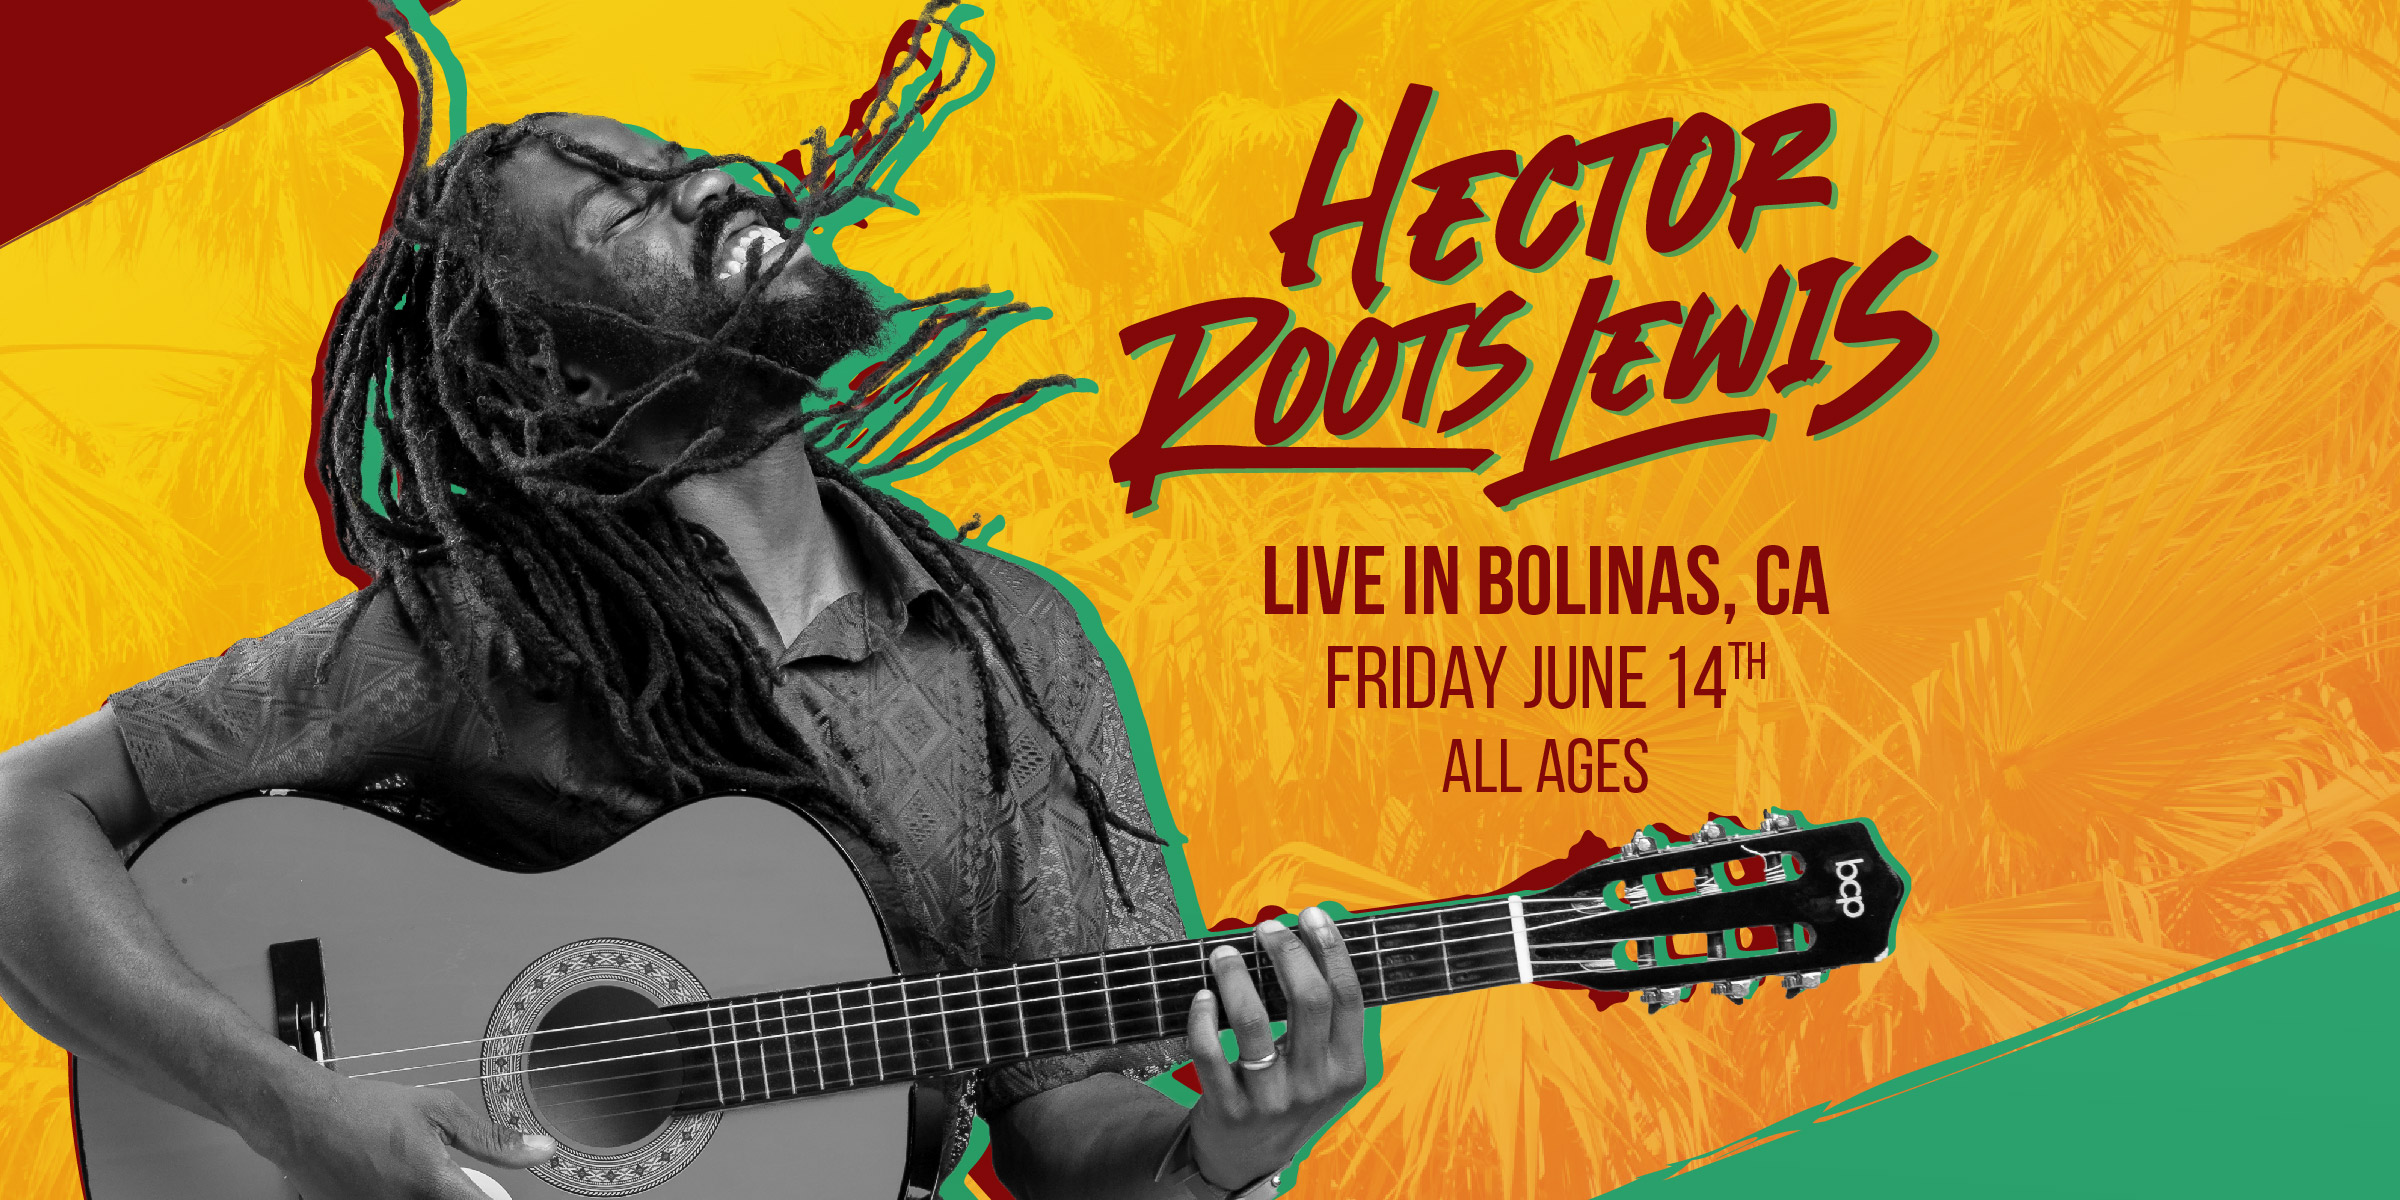 Hector “Roots” Lewis w/ the 7th Street Band at the Bolinas Community Center